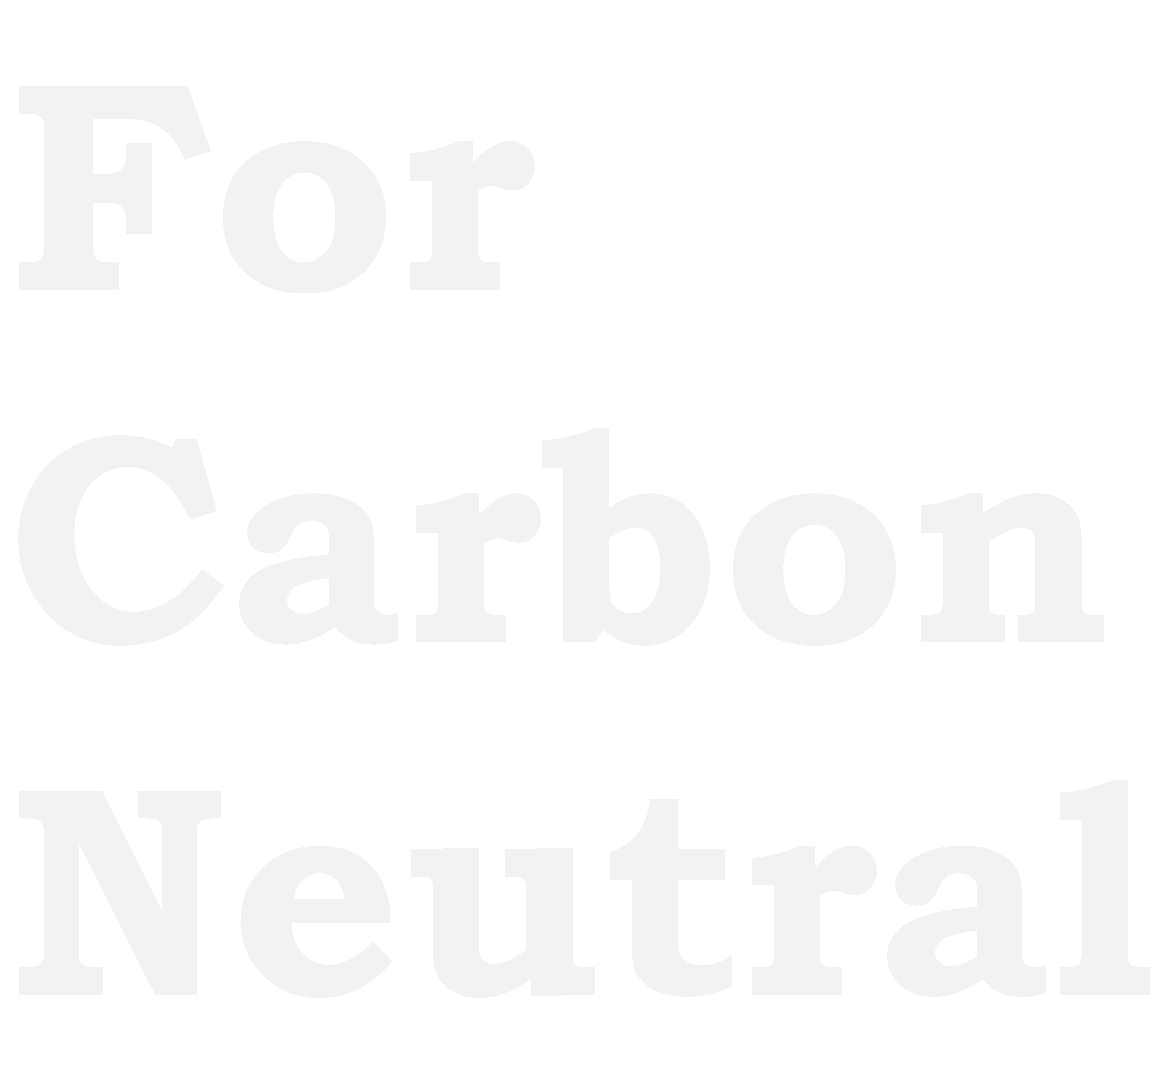 For Carbon Neutral